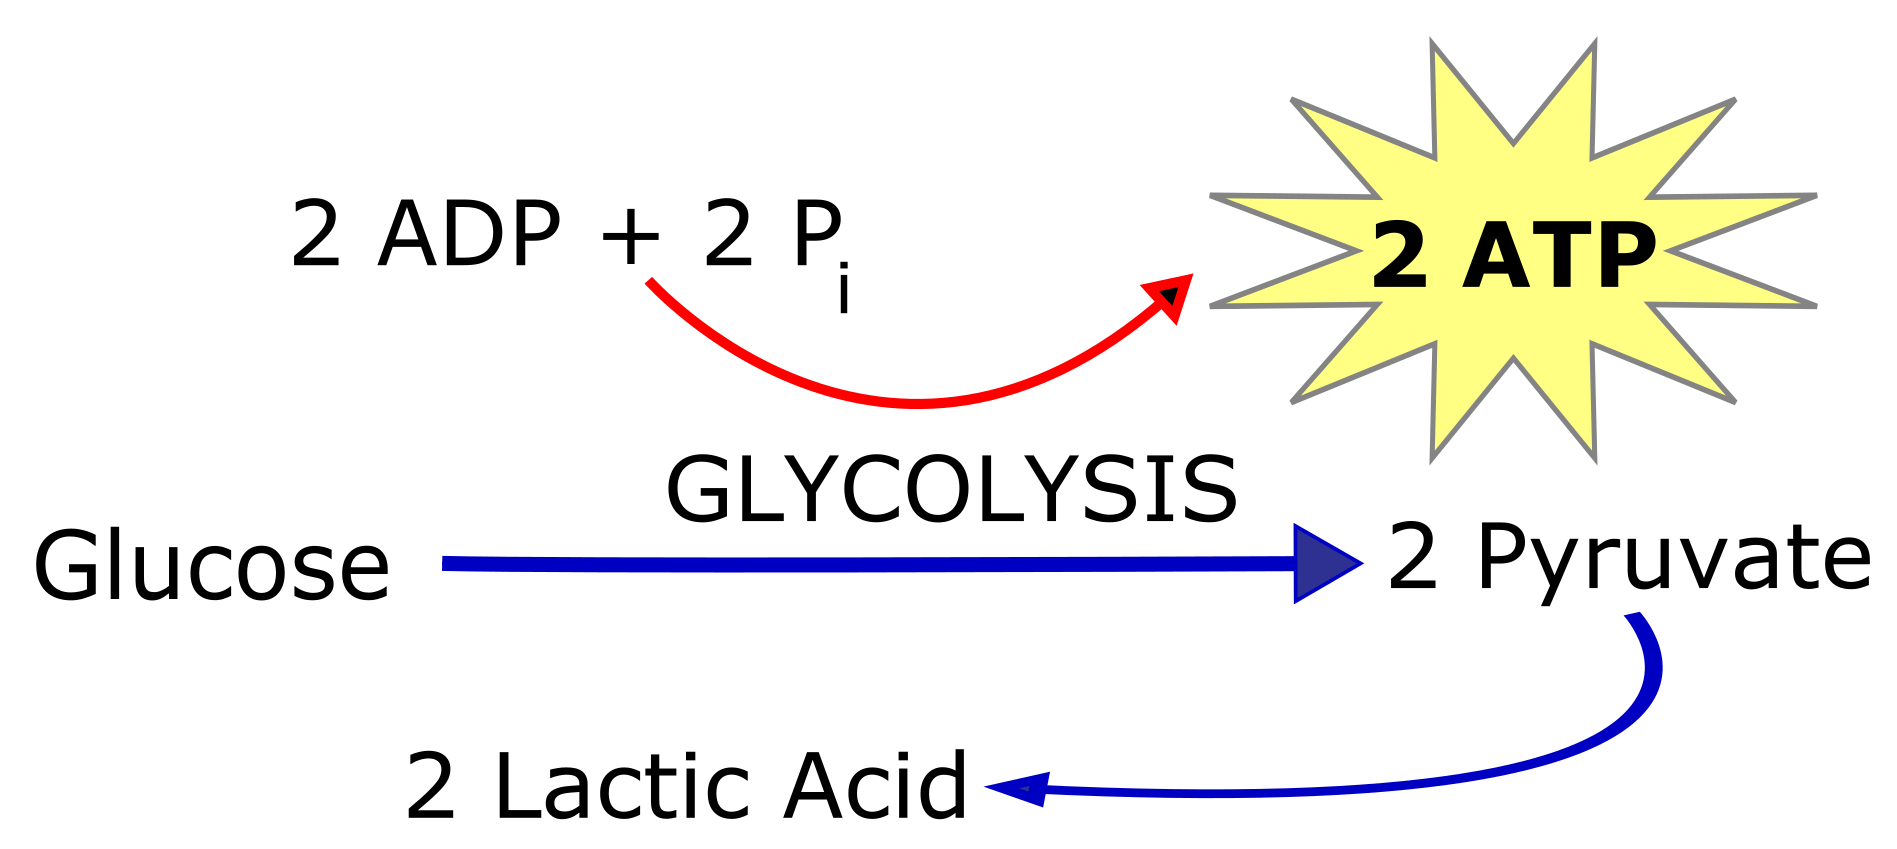 Image shows lactic acid fermation where a molecule of glucose is broken into 2 pyruvate molecules that are metabolized into lactic acid, producing 2 ATP in the process.